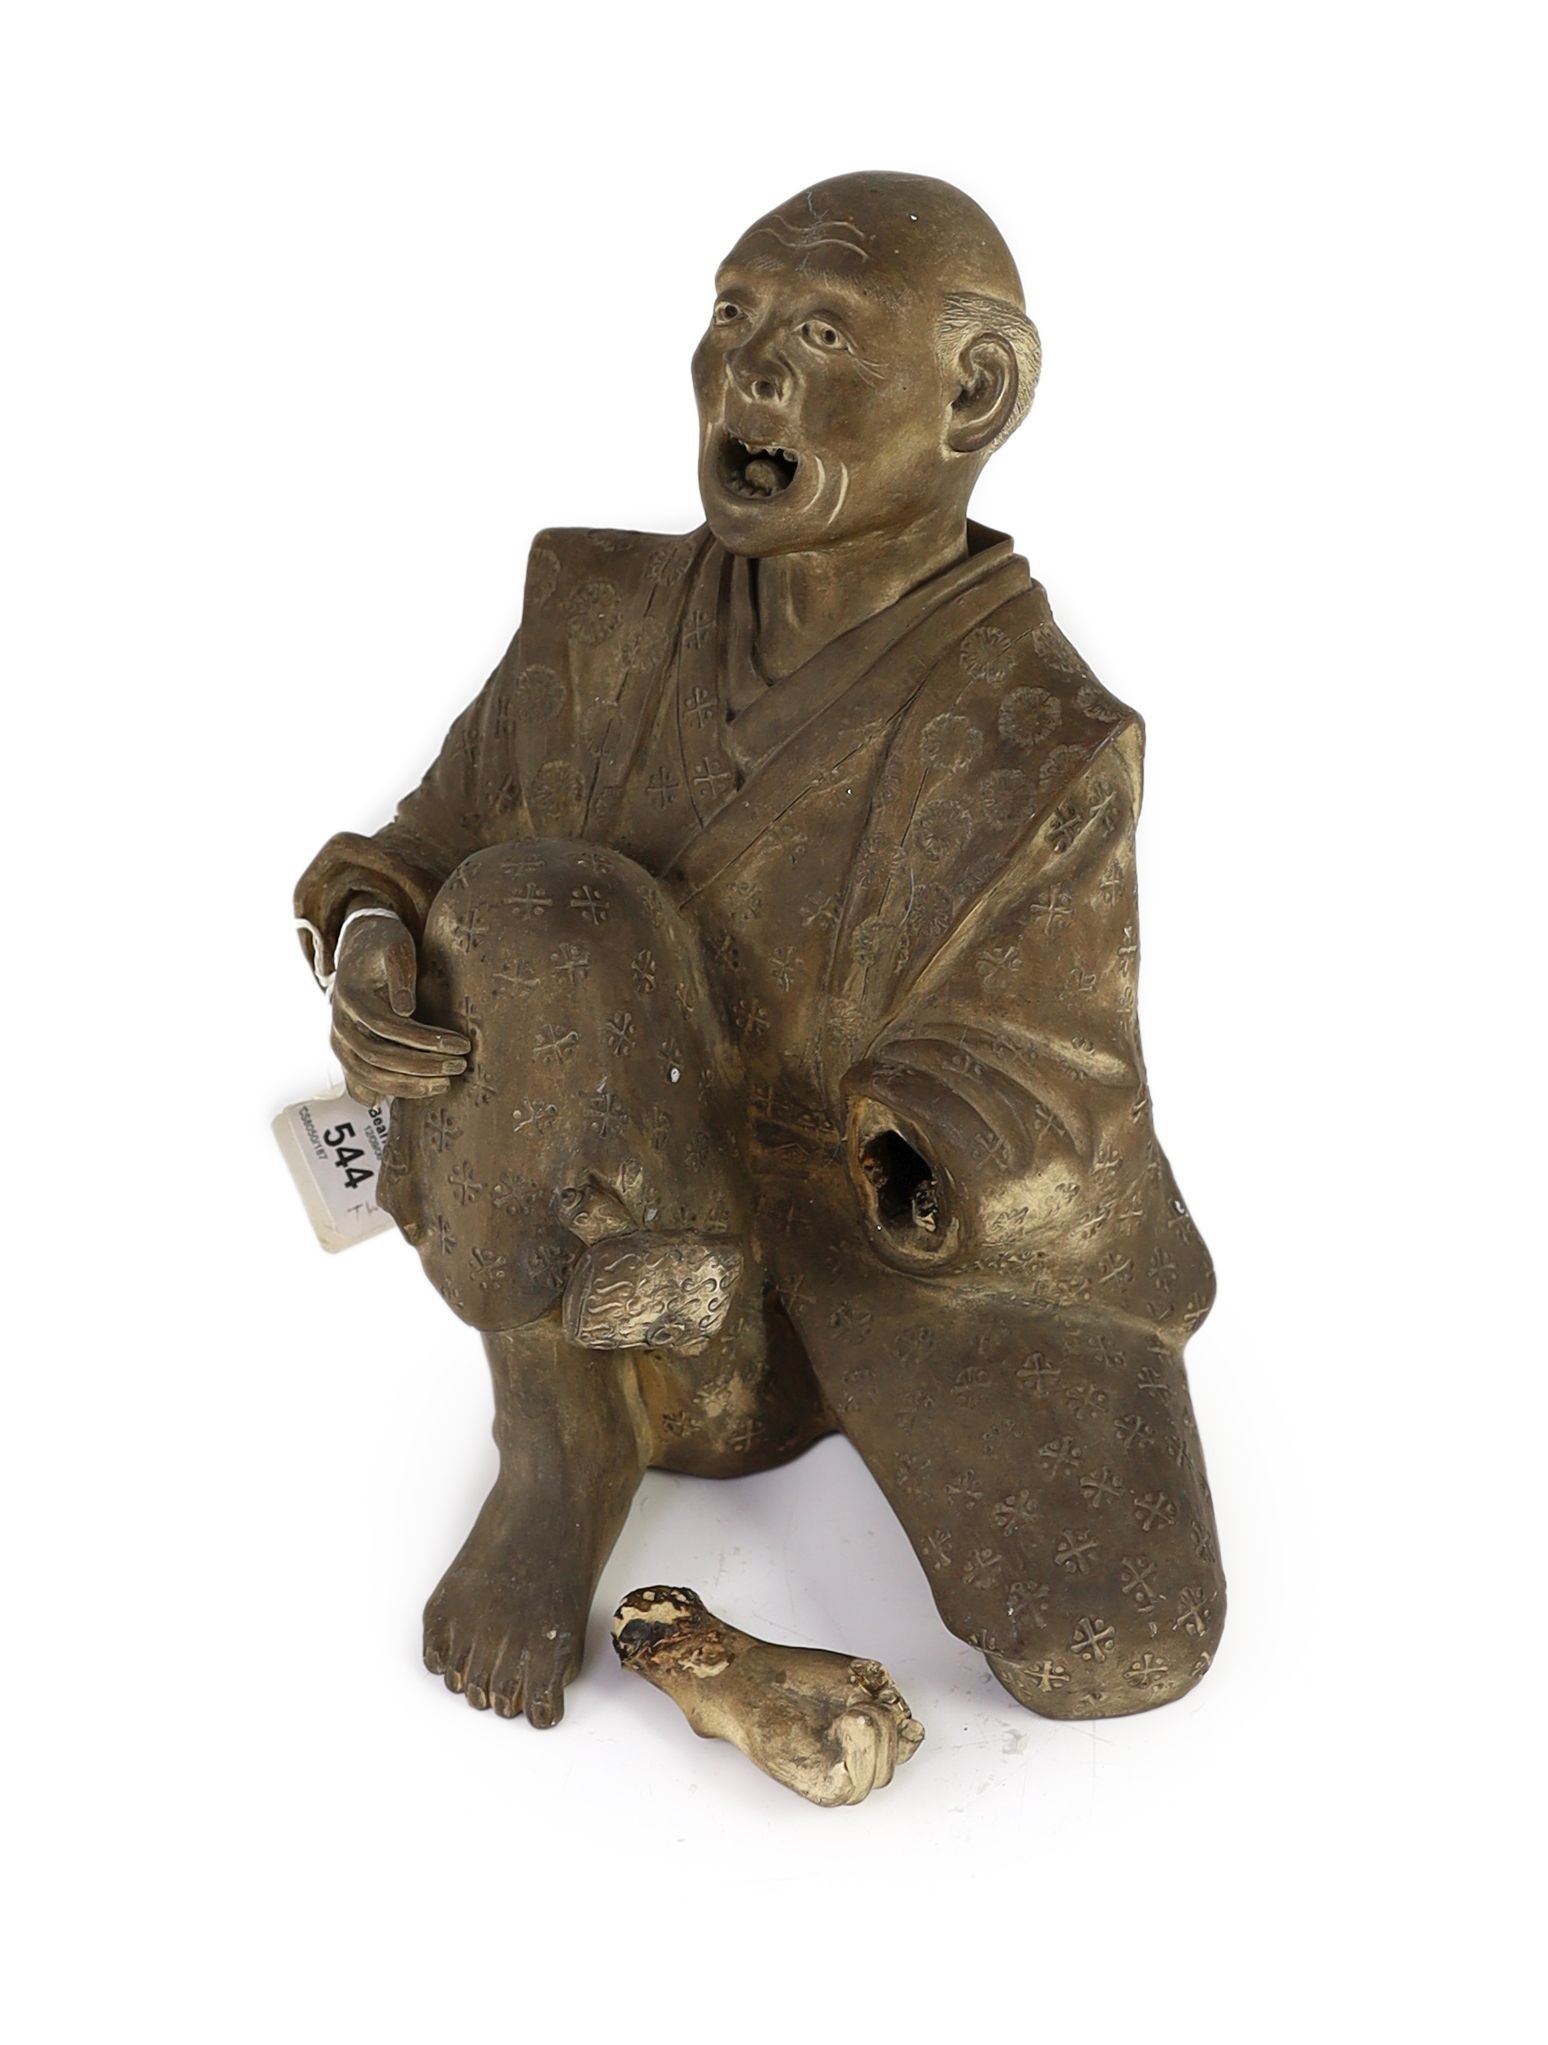 A Japanese terracotta figure of a kneeling and shouting man, 26cm high